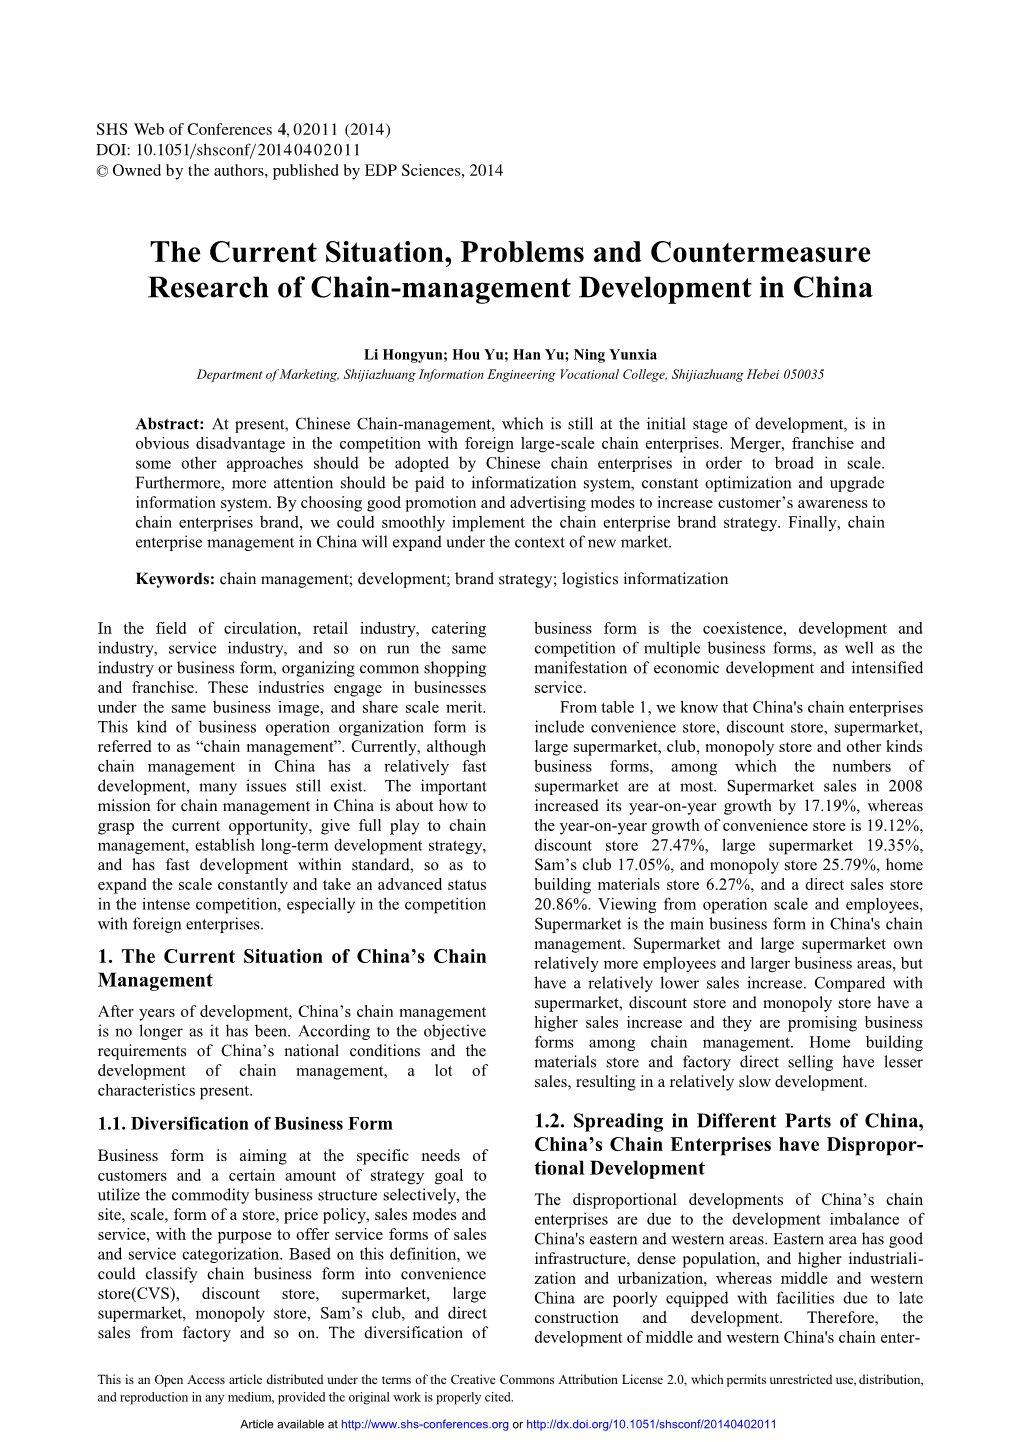 The Current Situation, Problems and Countermeasure Research of Chain-Management Development in China